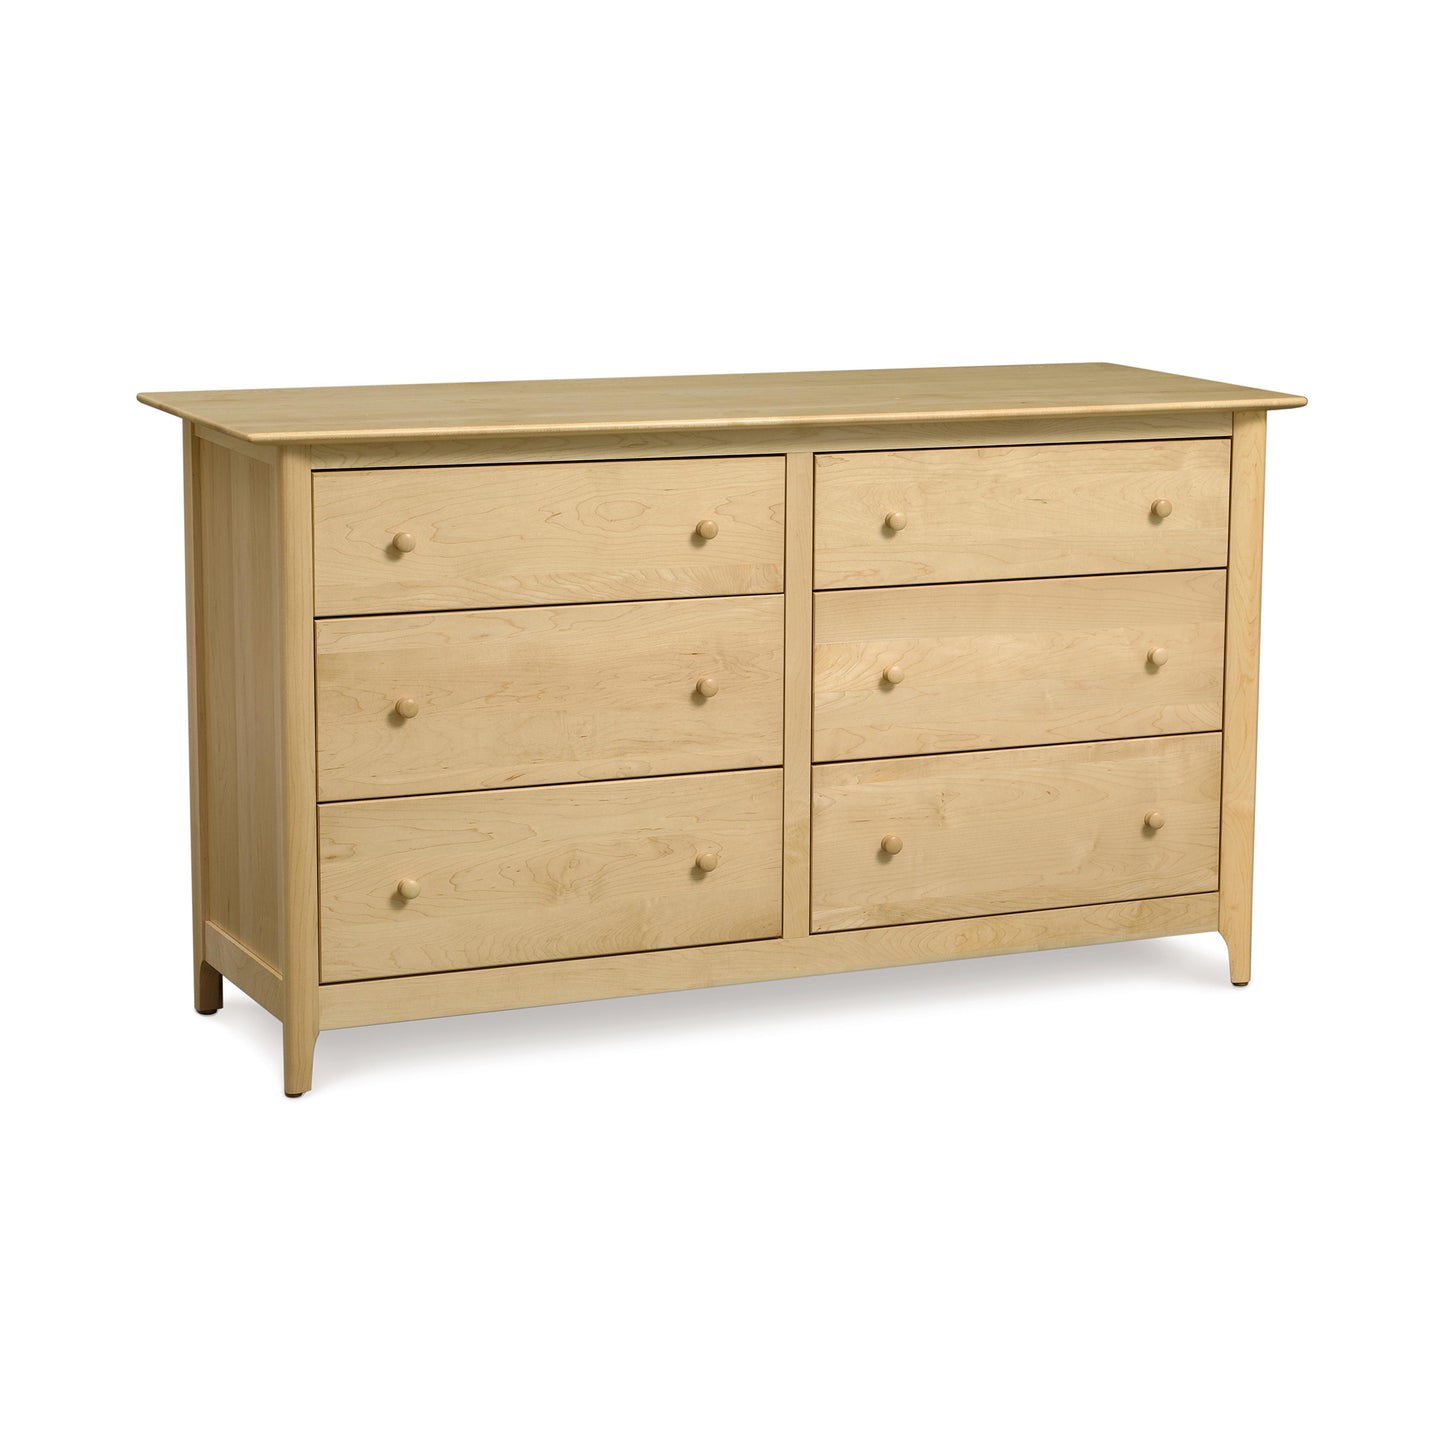 A solid wood Sarah 6-Drawer Dresser by Copeland Furniture isolated on a white background.